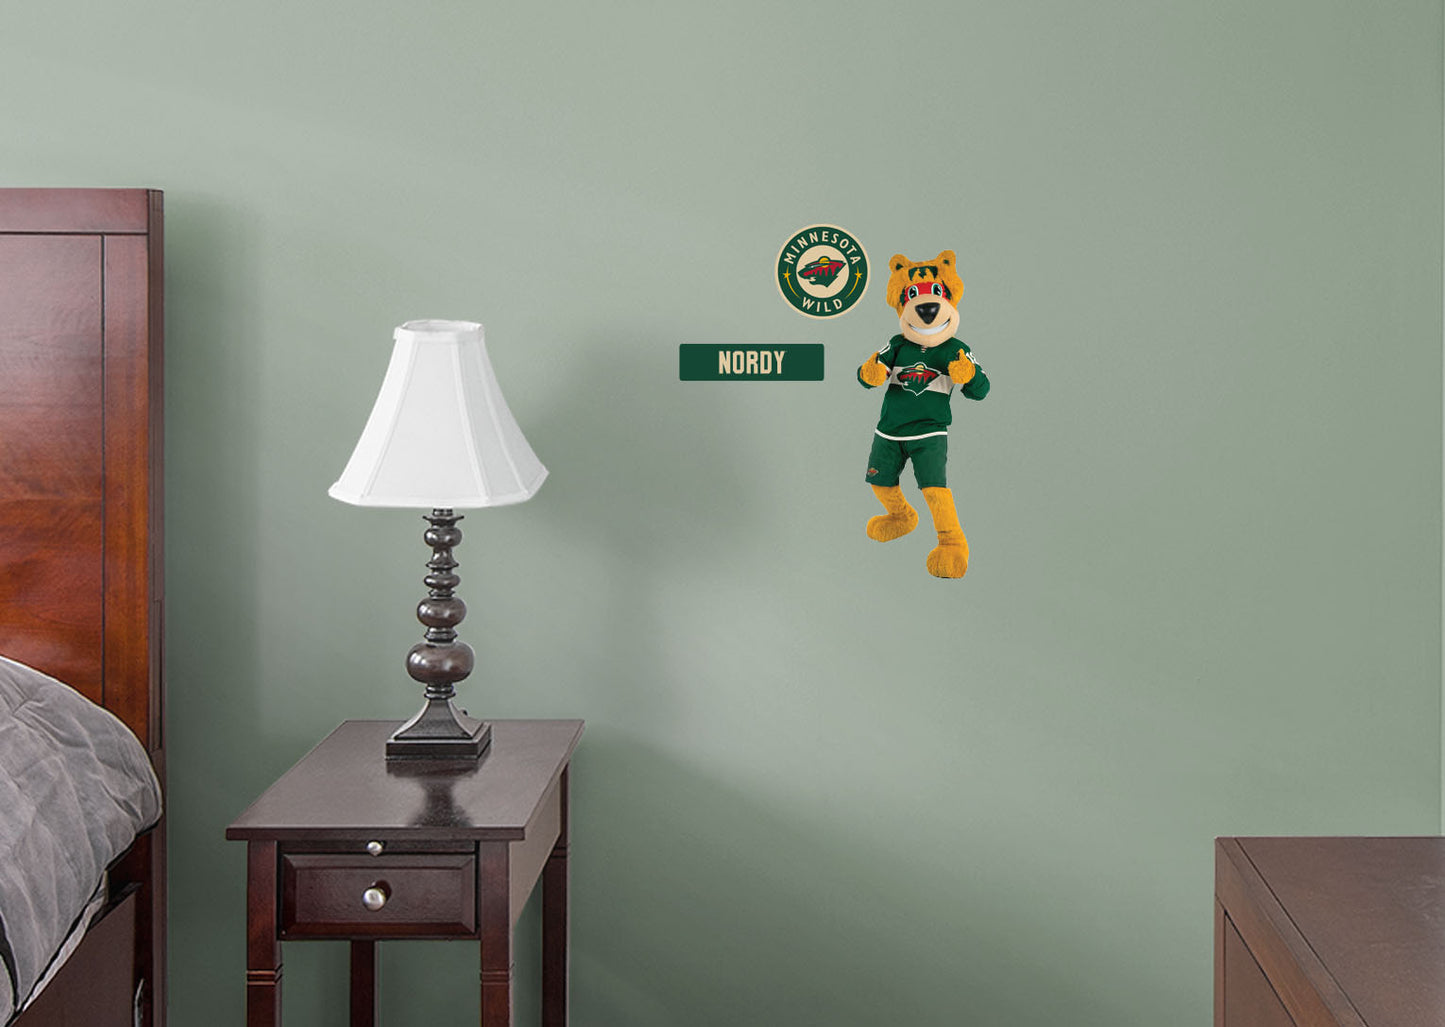 Minnesota Wild: Nordy 2021 Mascot        - Officially Licensed NHL Removable Wall   Adhesive Decal